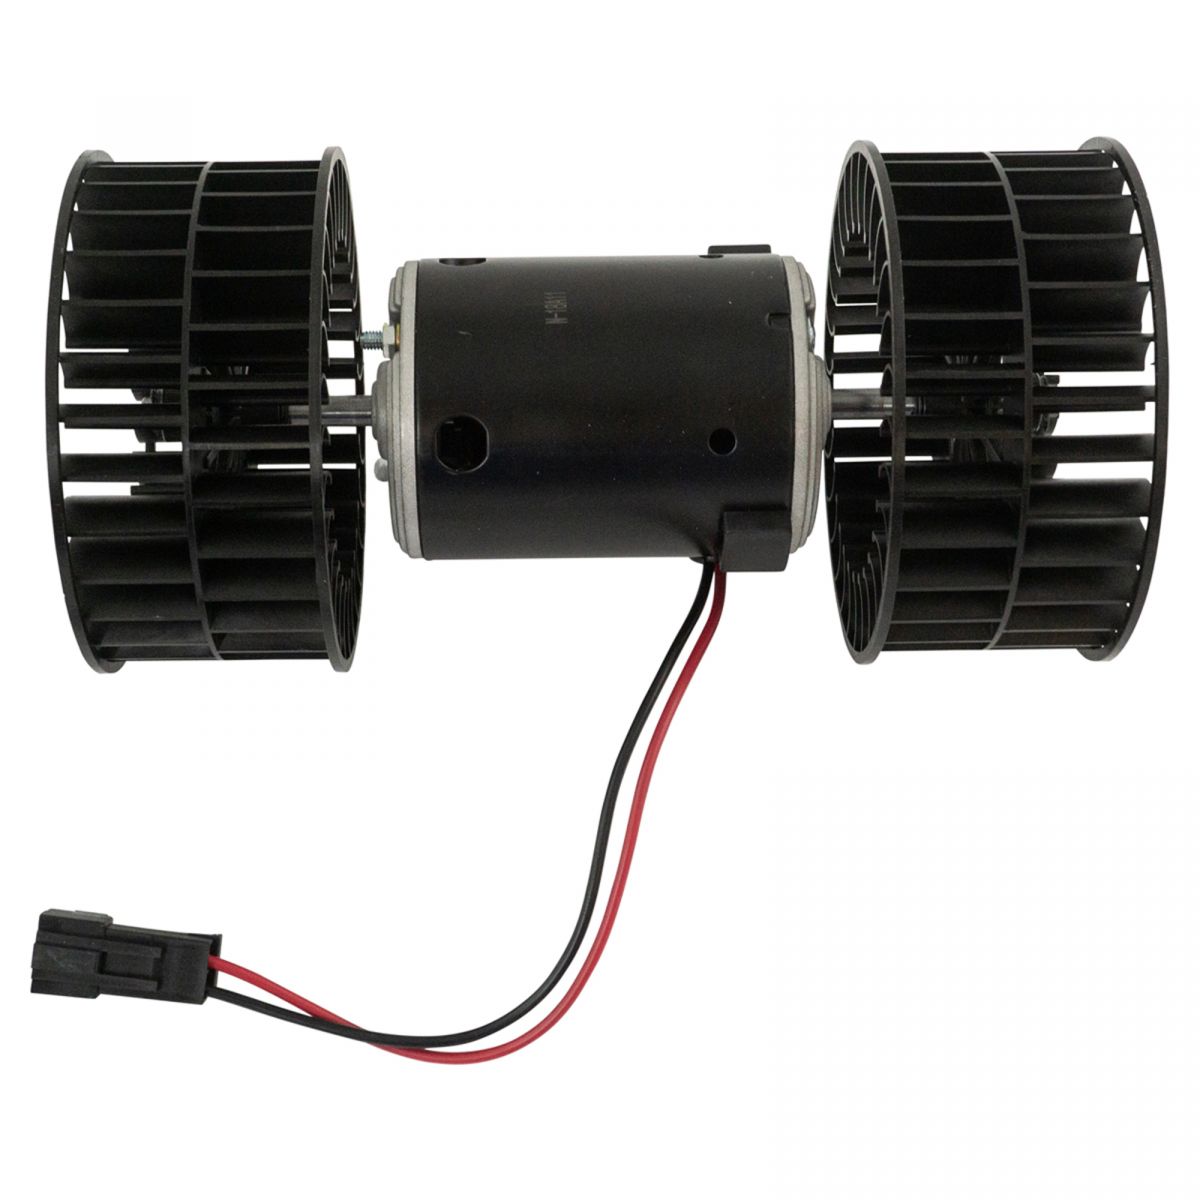 Heater Blower Motor w/Fan Cage Blower HVAC Blower Motor Assembly for Volvo Truck 2002 2003 2004 2005 2006 Single Speed Replaces 615-58677 700182 